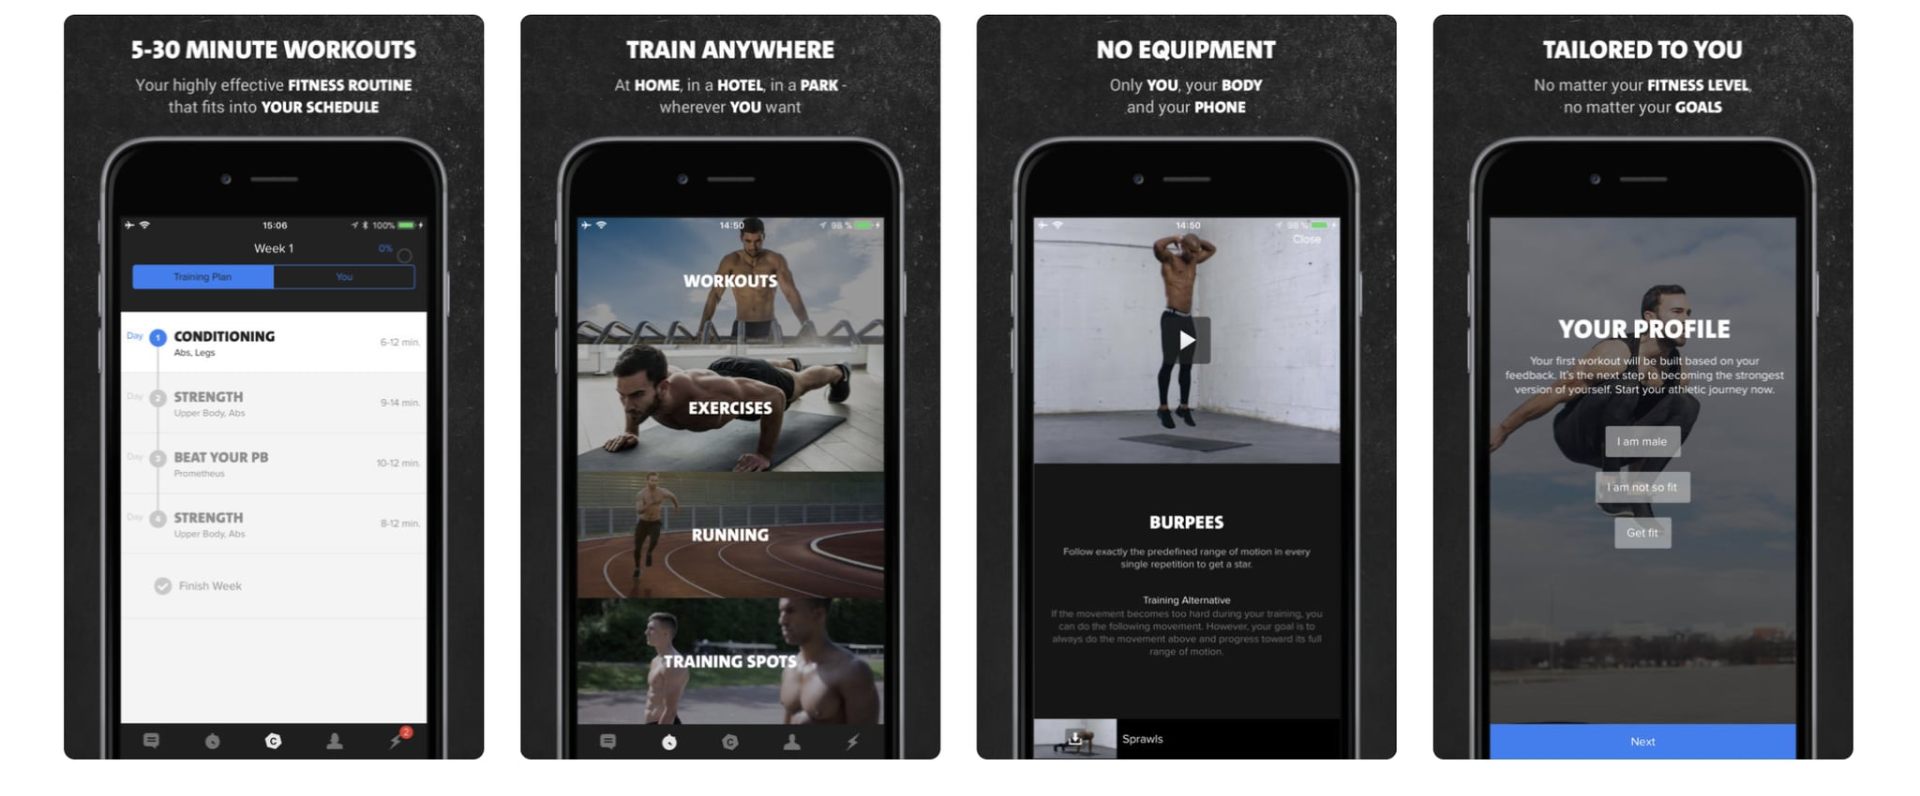 Freeletics Training Coach - How To Download And Use The App